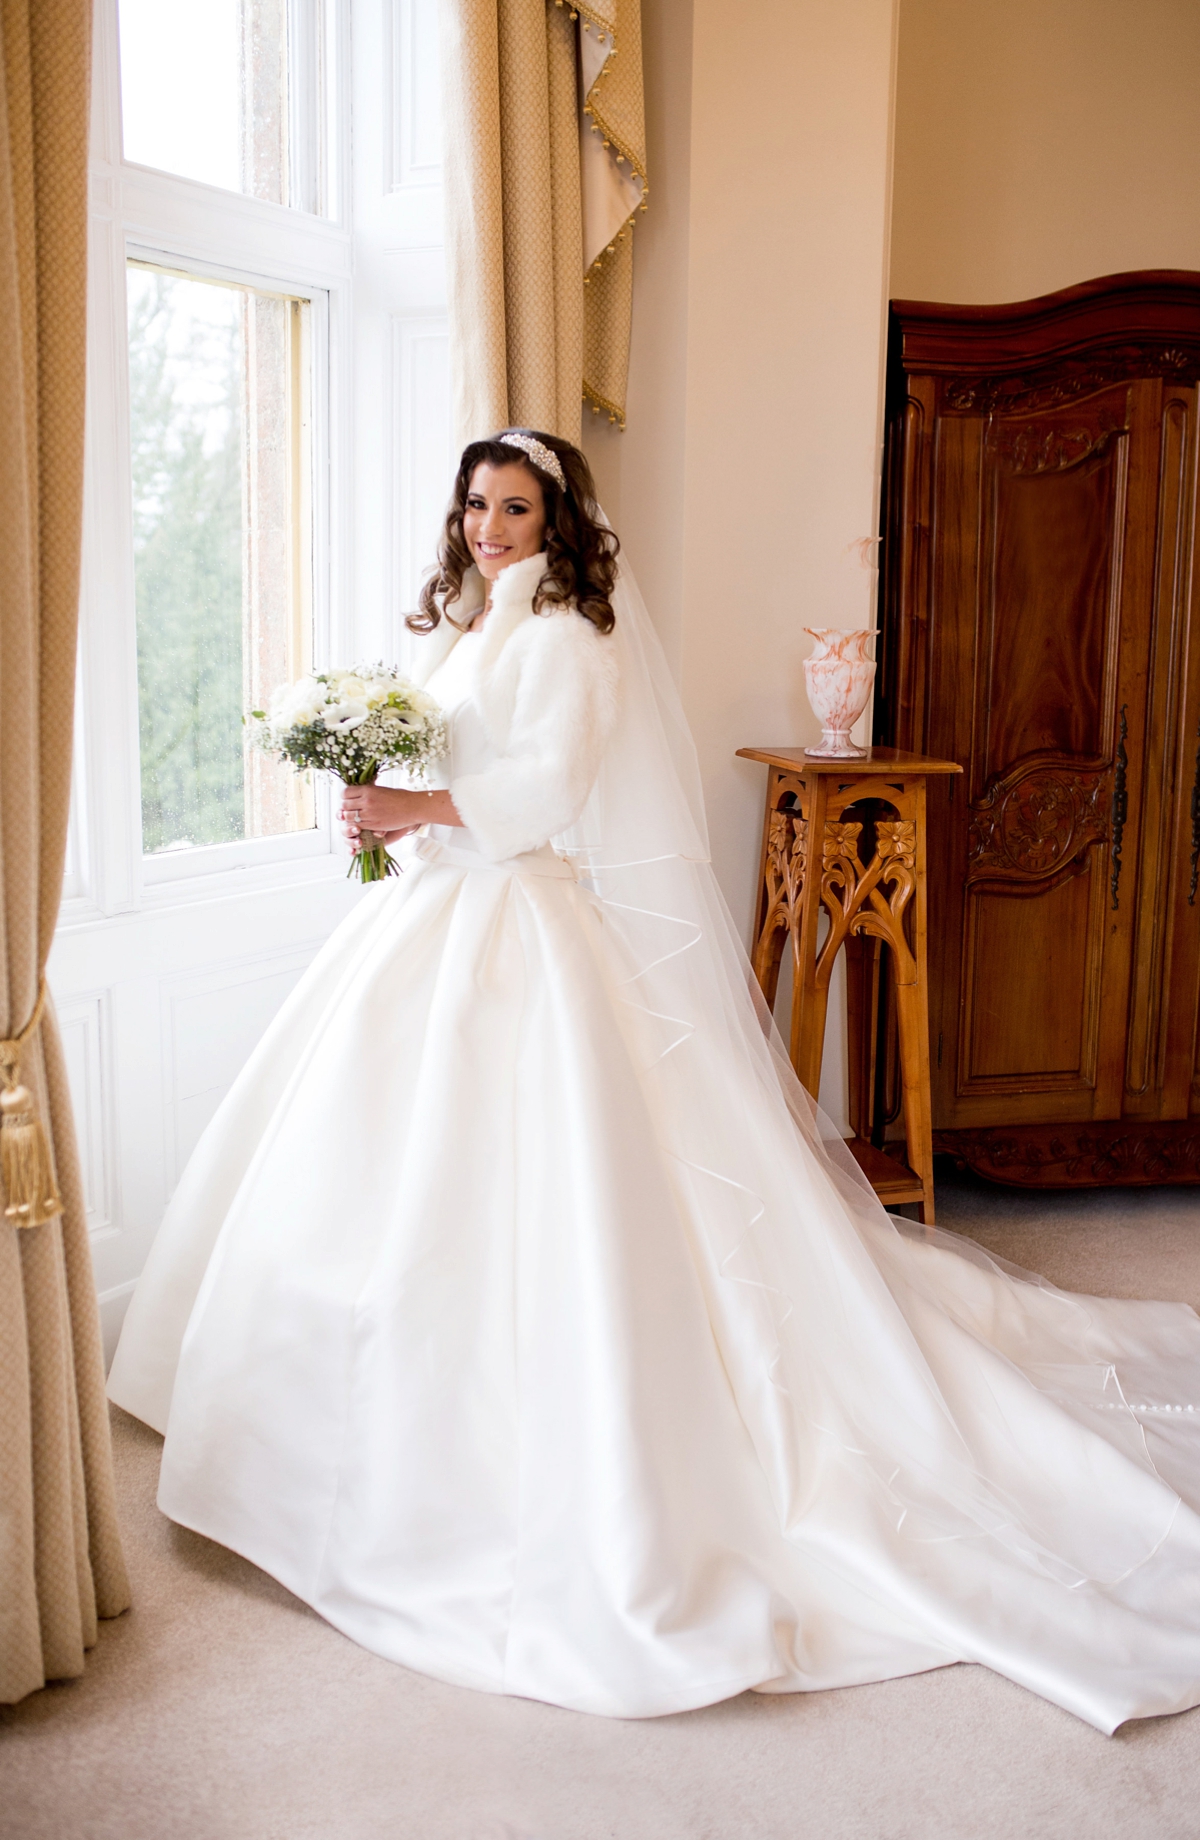 7 A Pronovias gown for a beautiful blue wedding